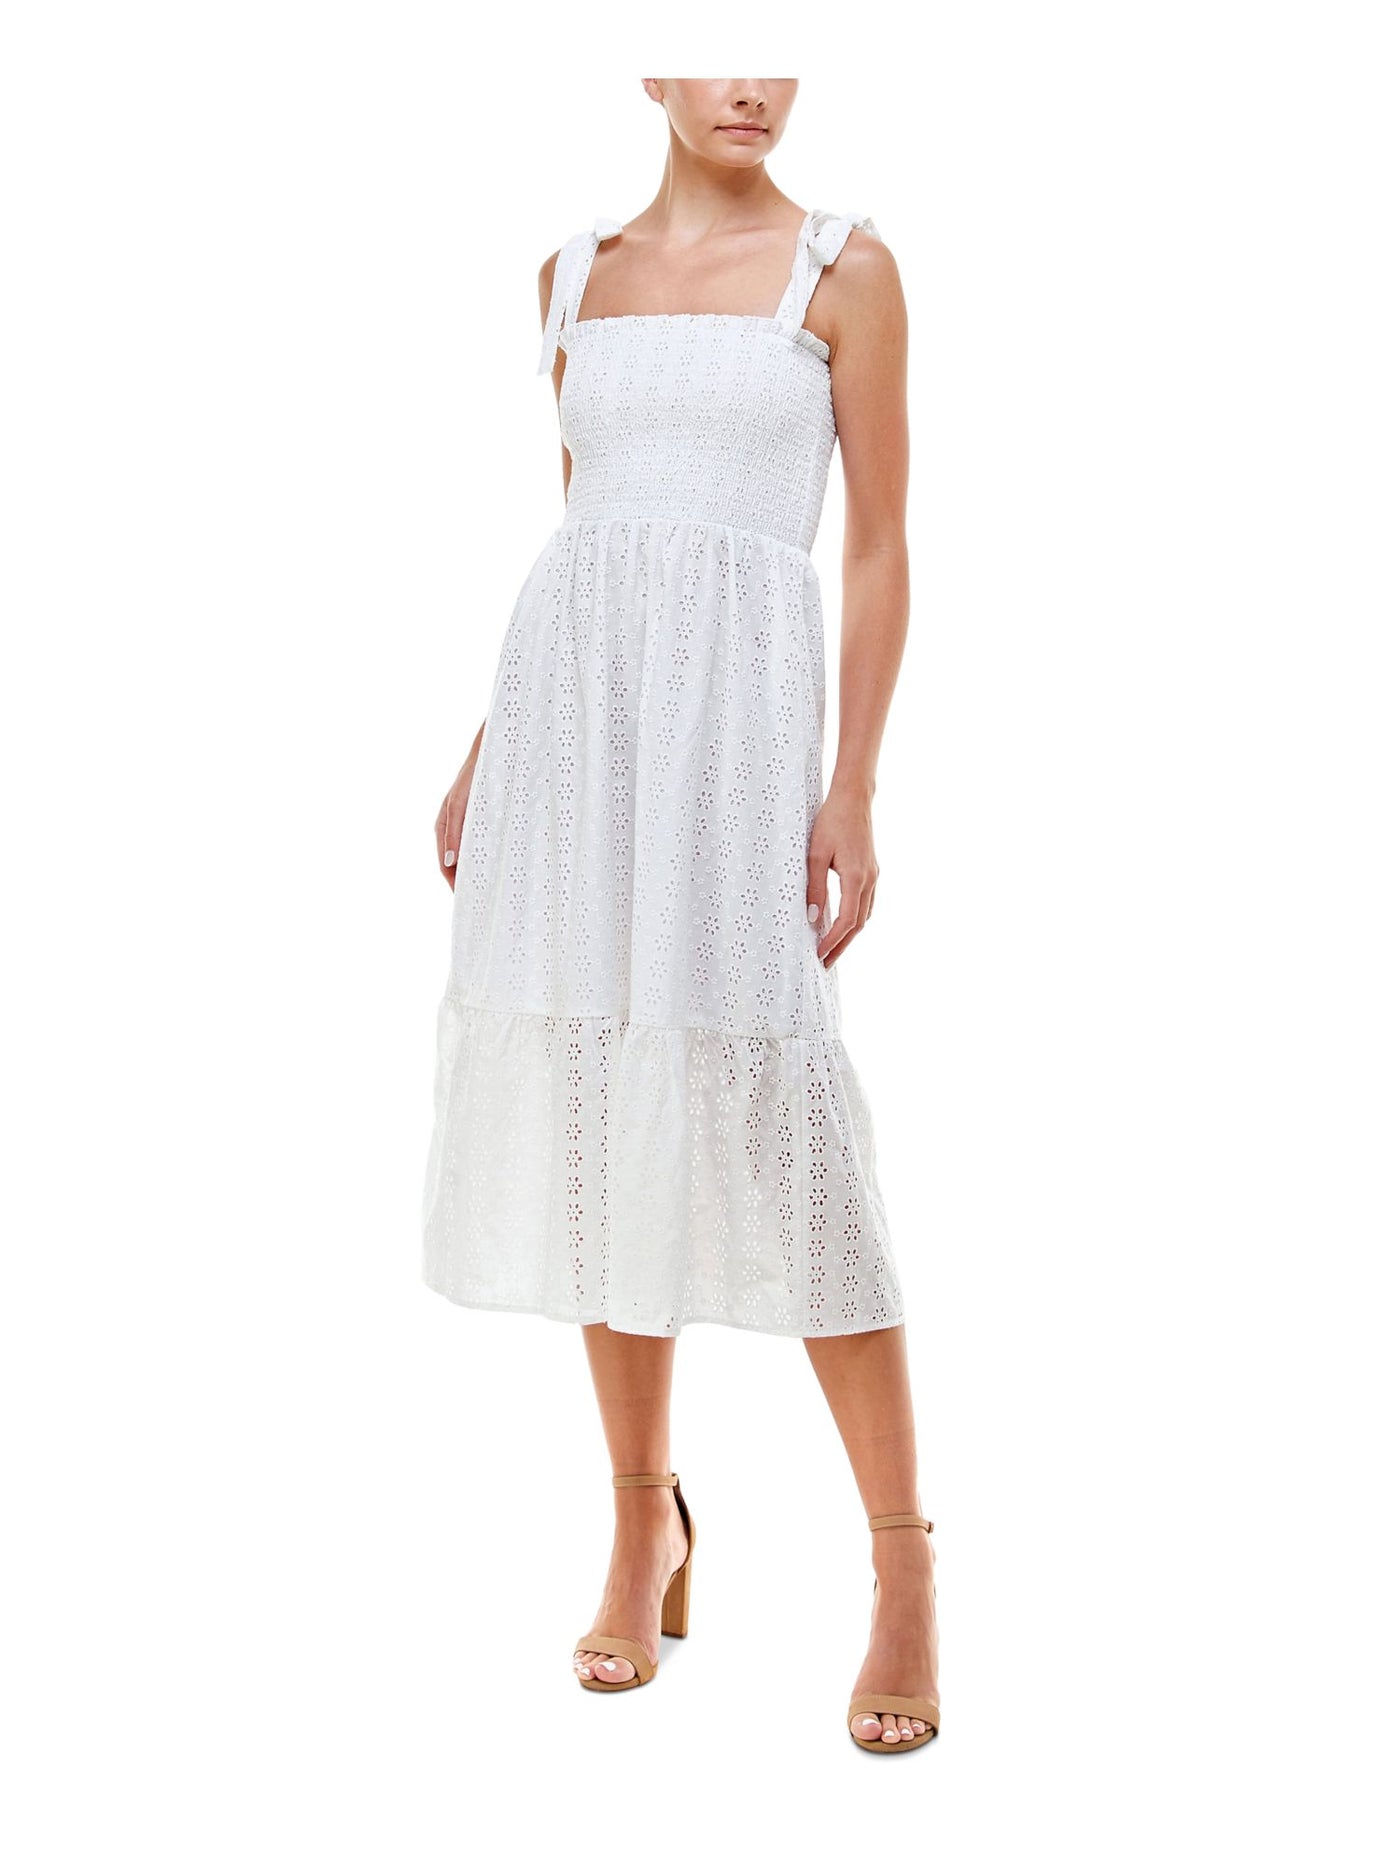 Q+A LOS ANGELES Womens White Smocked Eyelet Tiered Hem Lined Sleeveless Square Neck Midi Fit + Flare Dress Juniors M